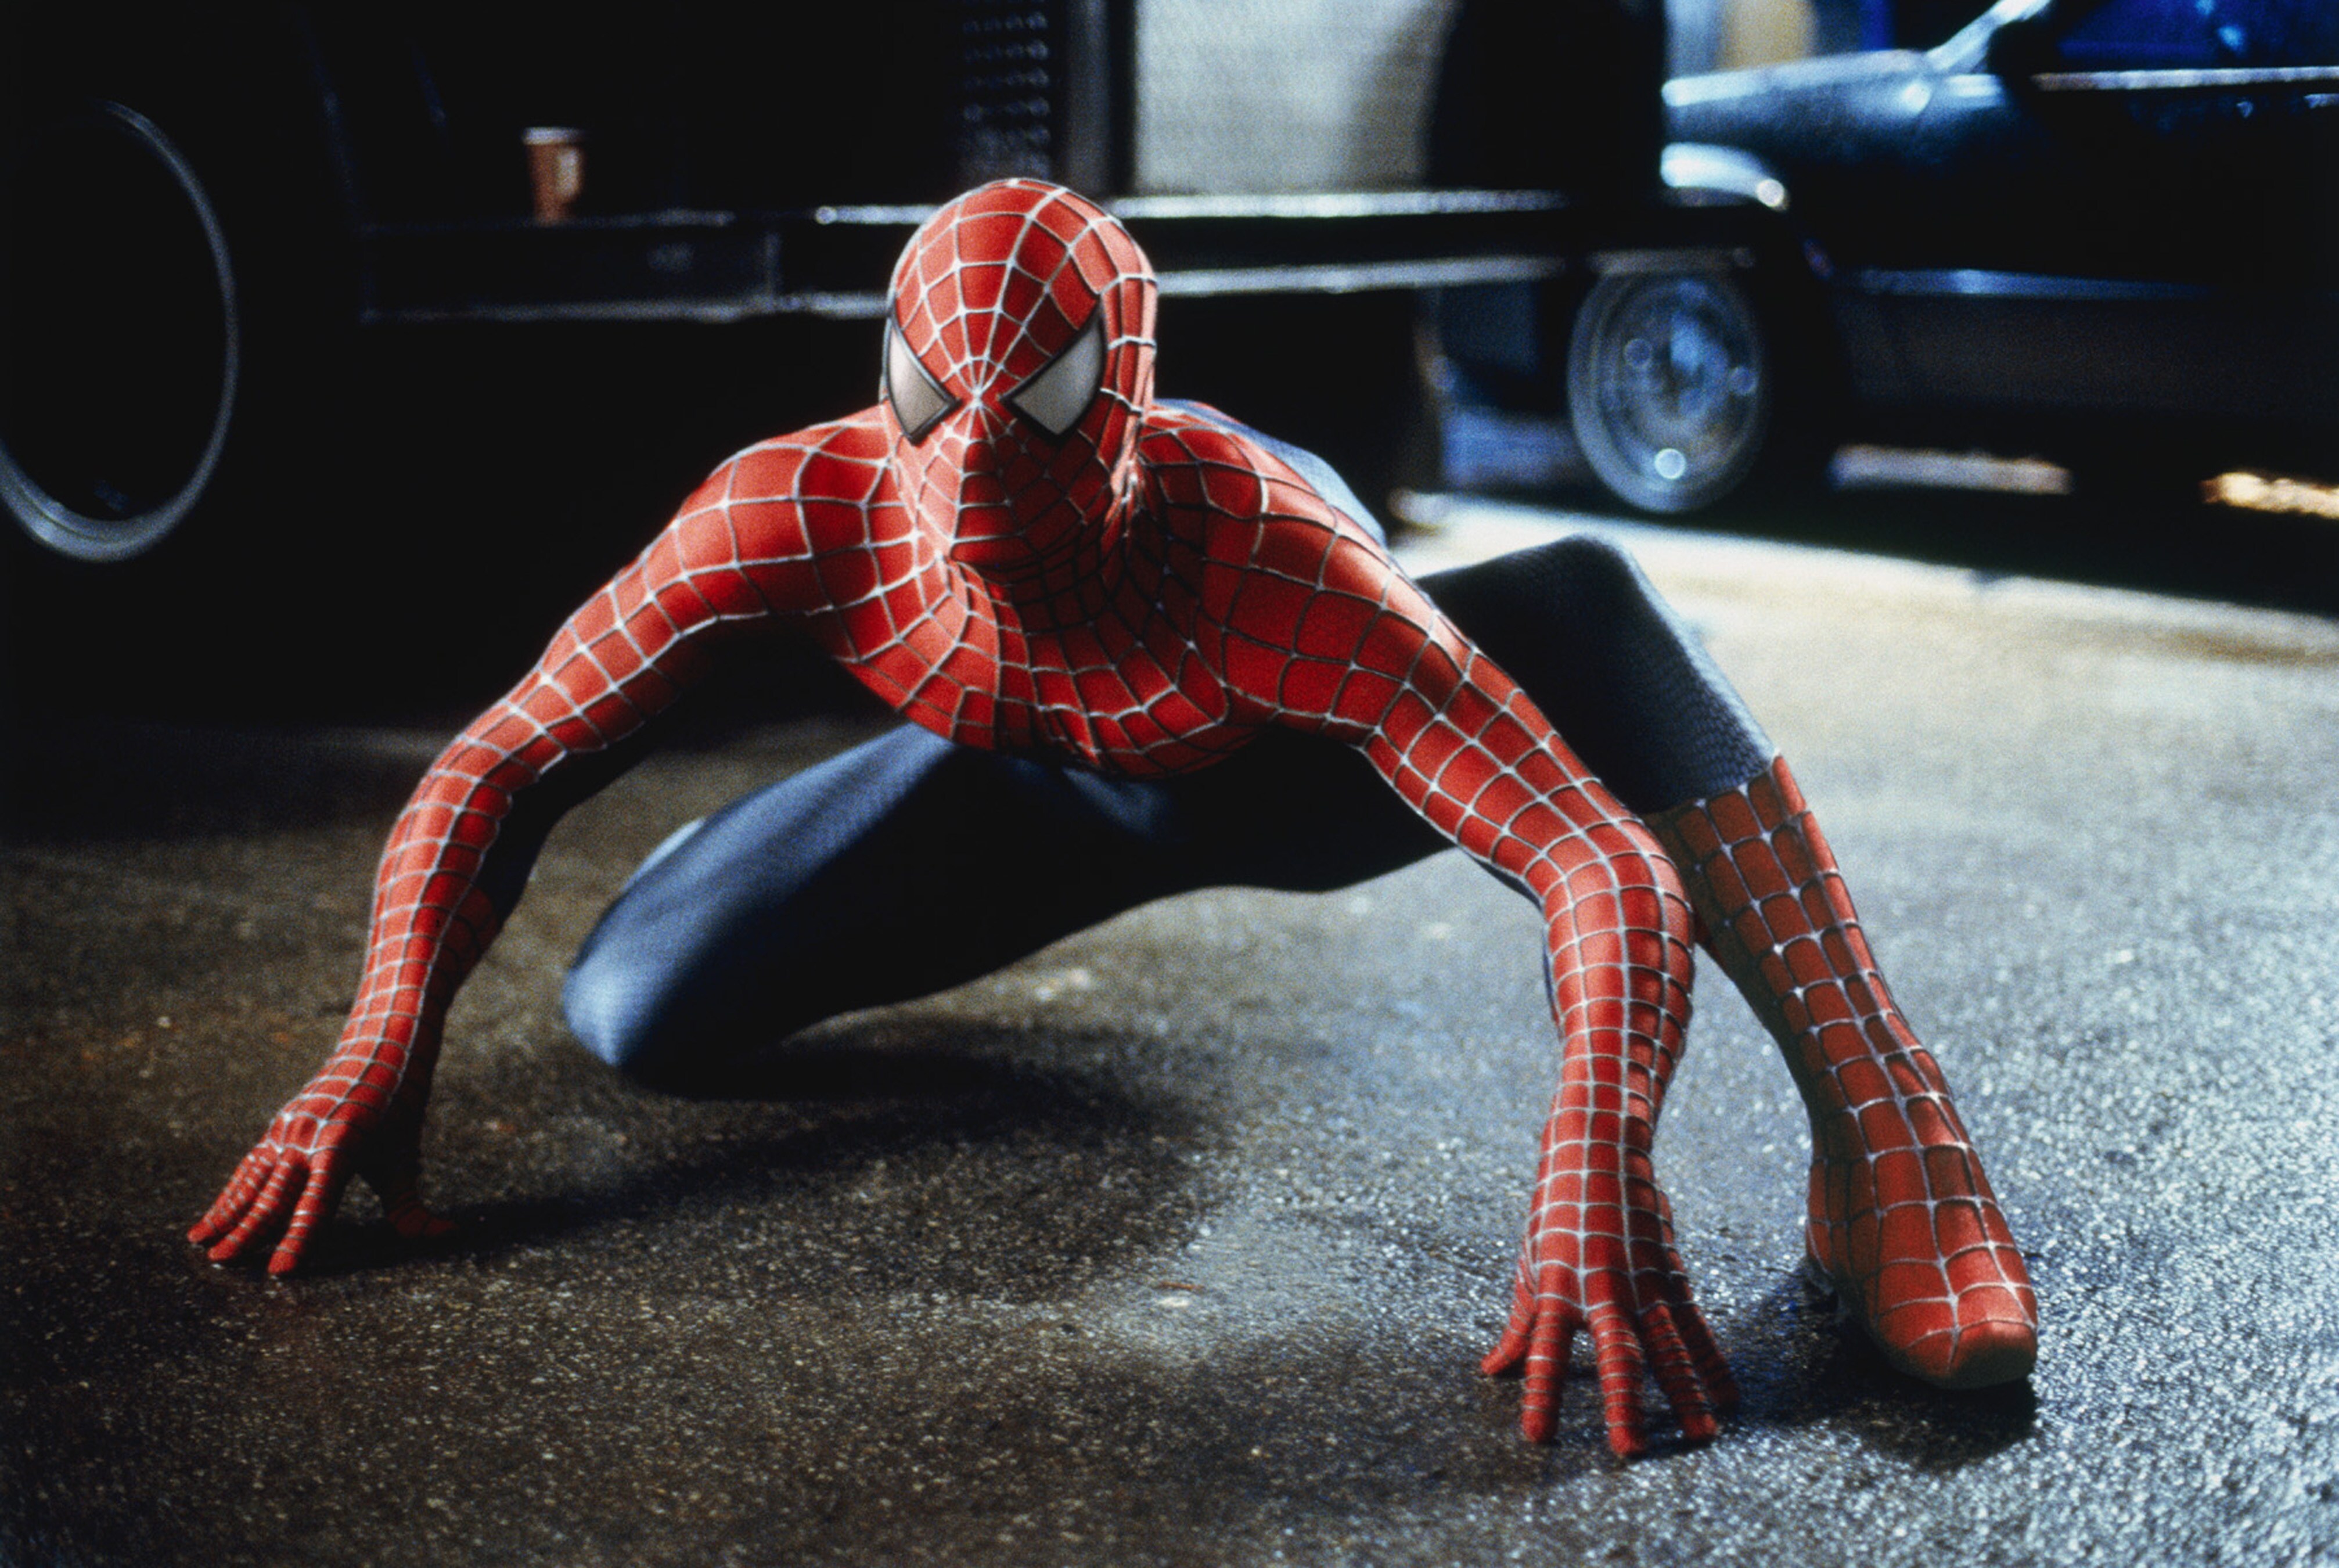 Disney+ Announces Amazing Spider-Man 2 Streaming Release Date